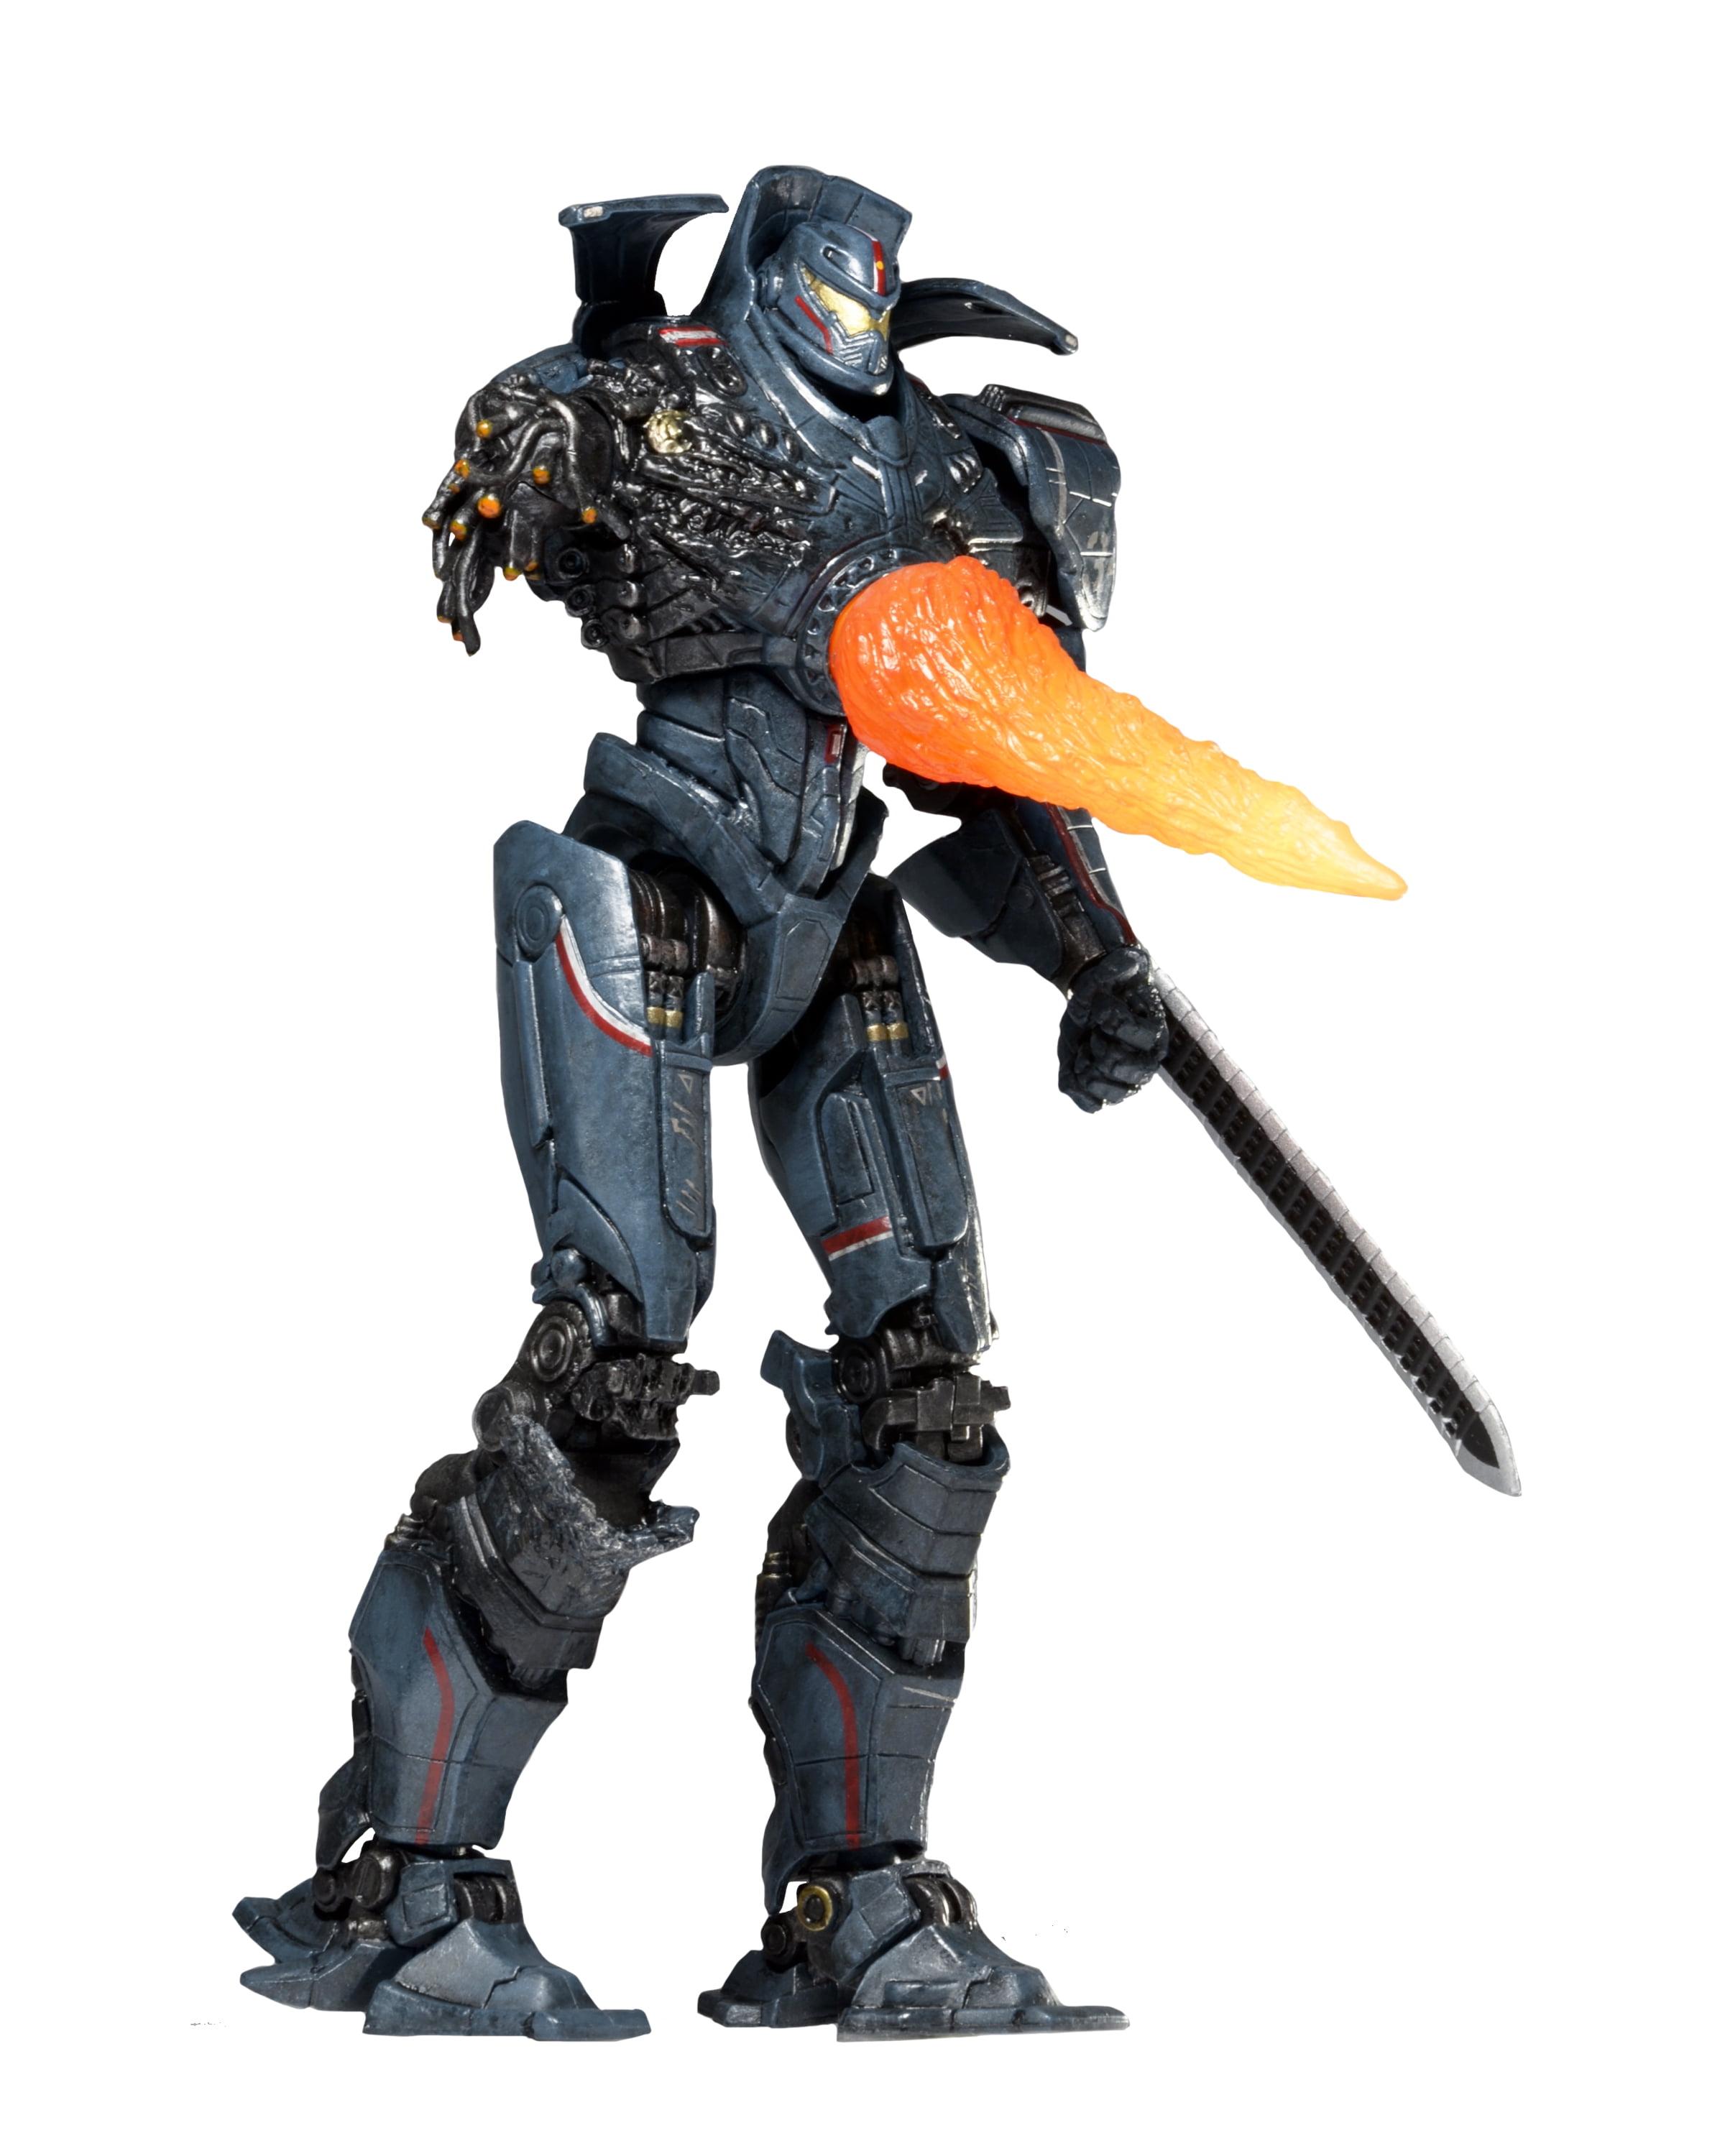 7" inch Scale Pacific Rim Jaeger Action Figure Toy Gift Set New Box Package 